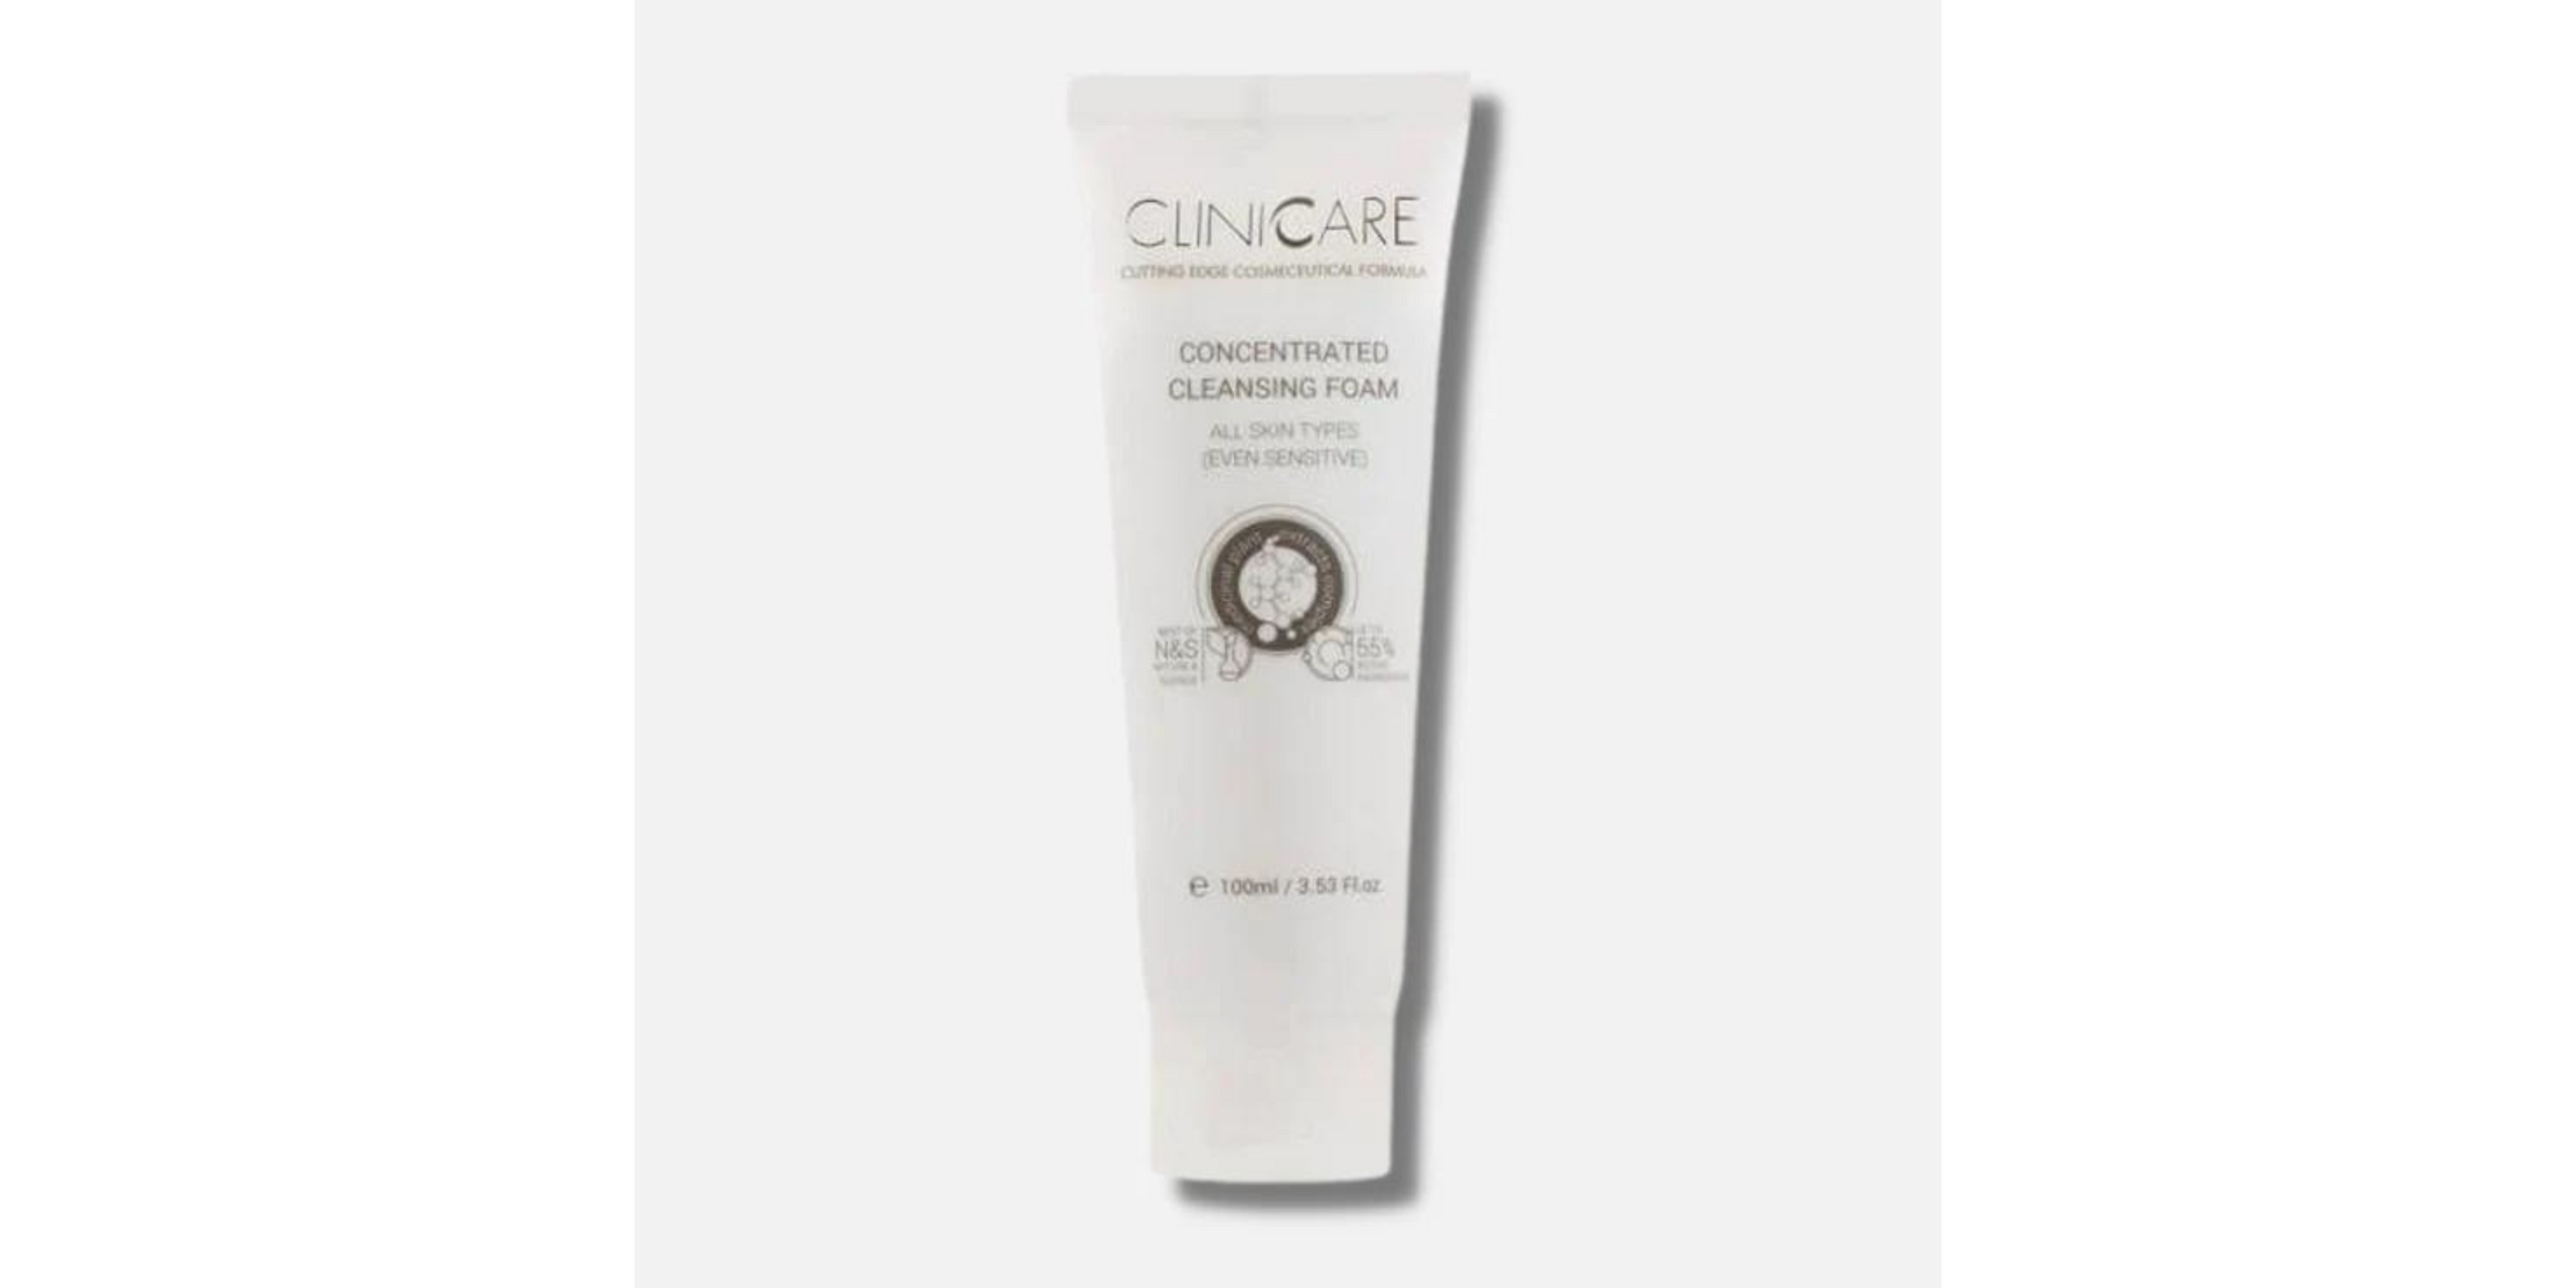 The Pros and Cons of the CLINICCARE Concentrated Cleansing Foam 100ml